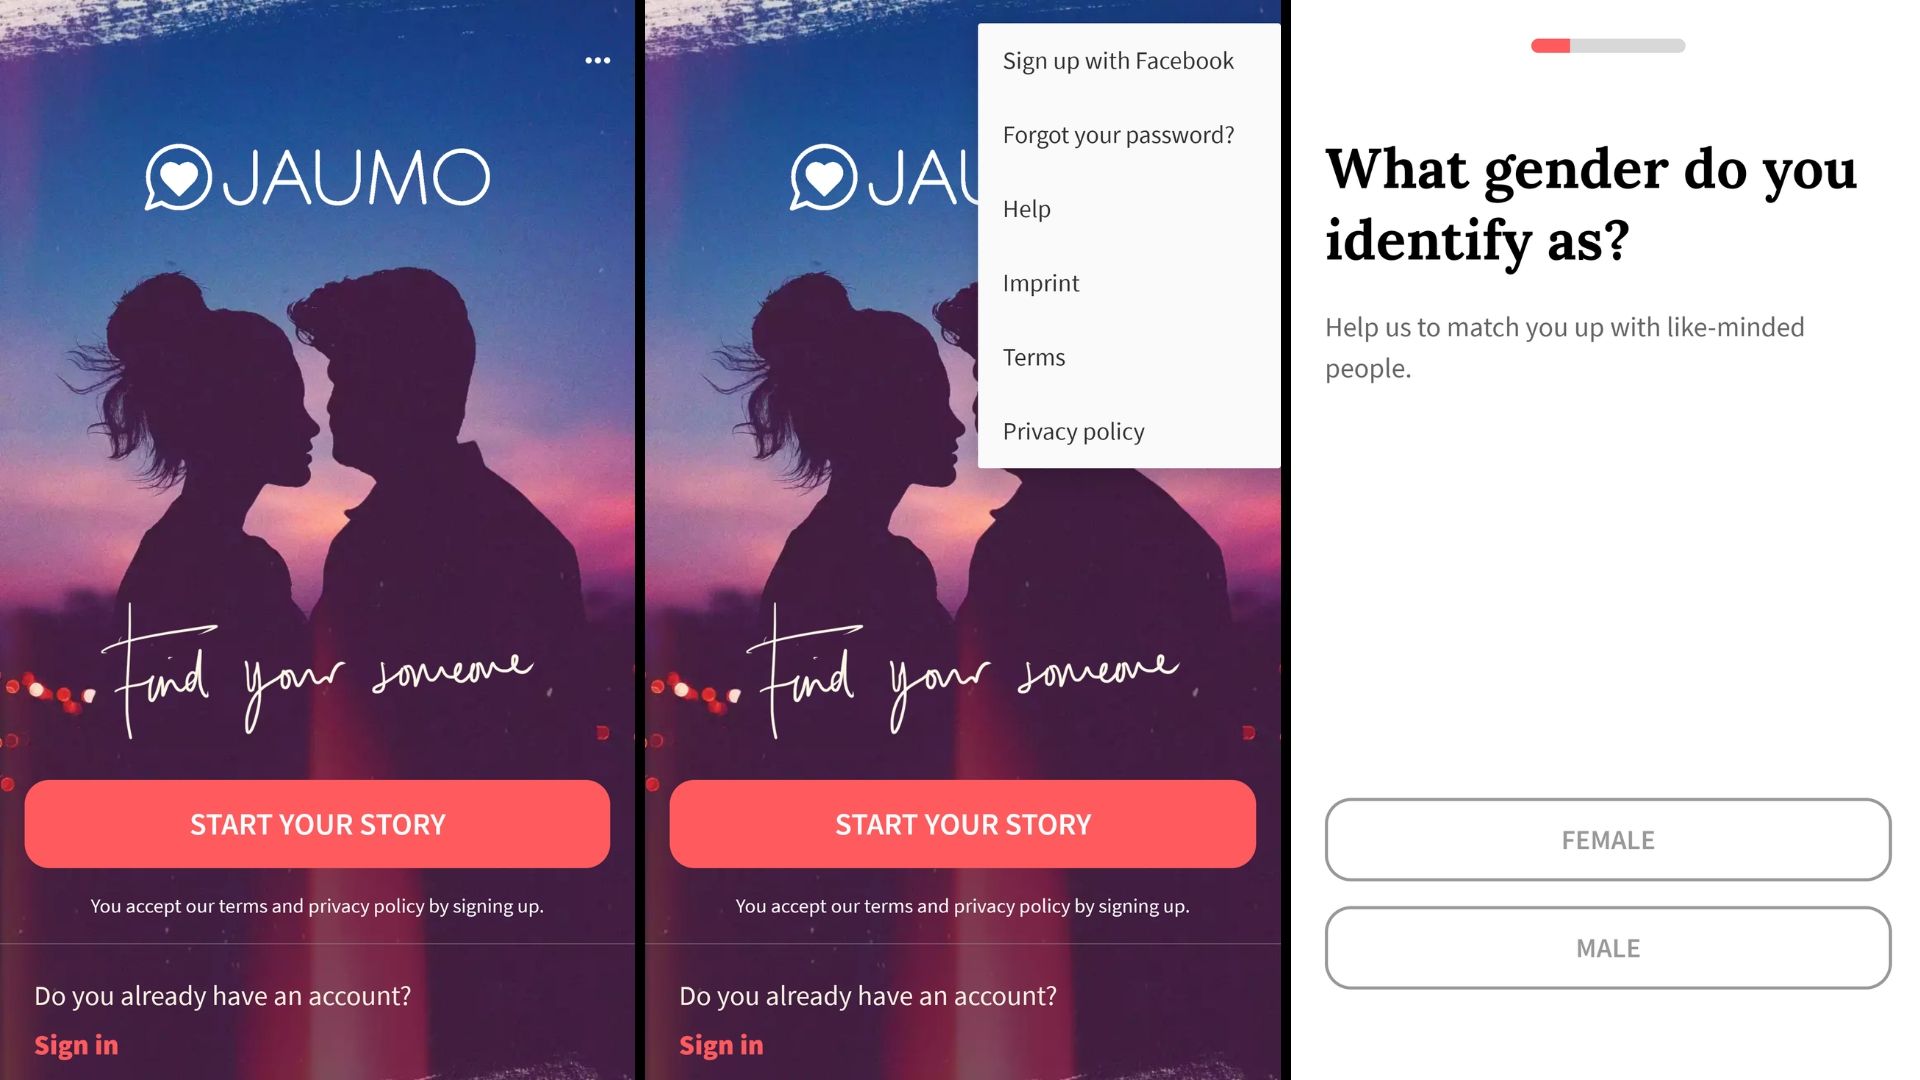 The Jaumo dating-app experience is designed to be as enjoyable, accurate